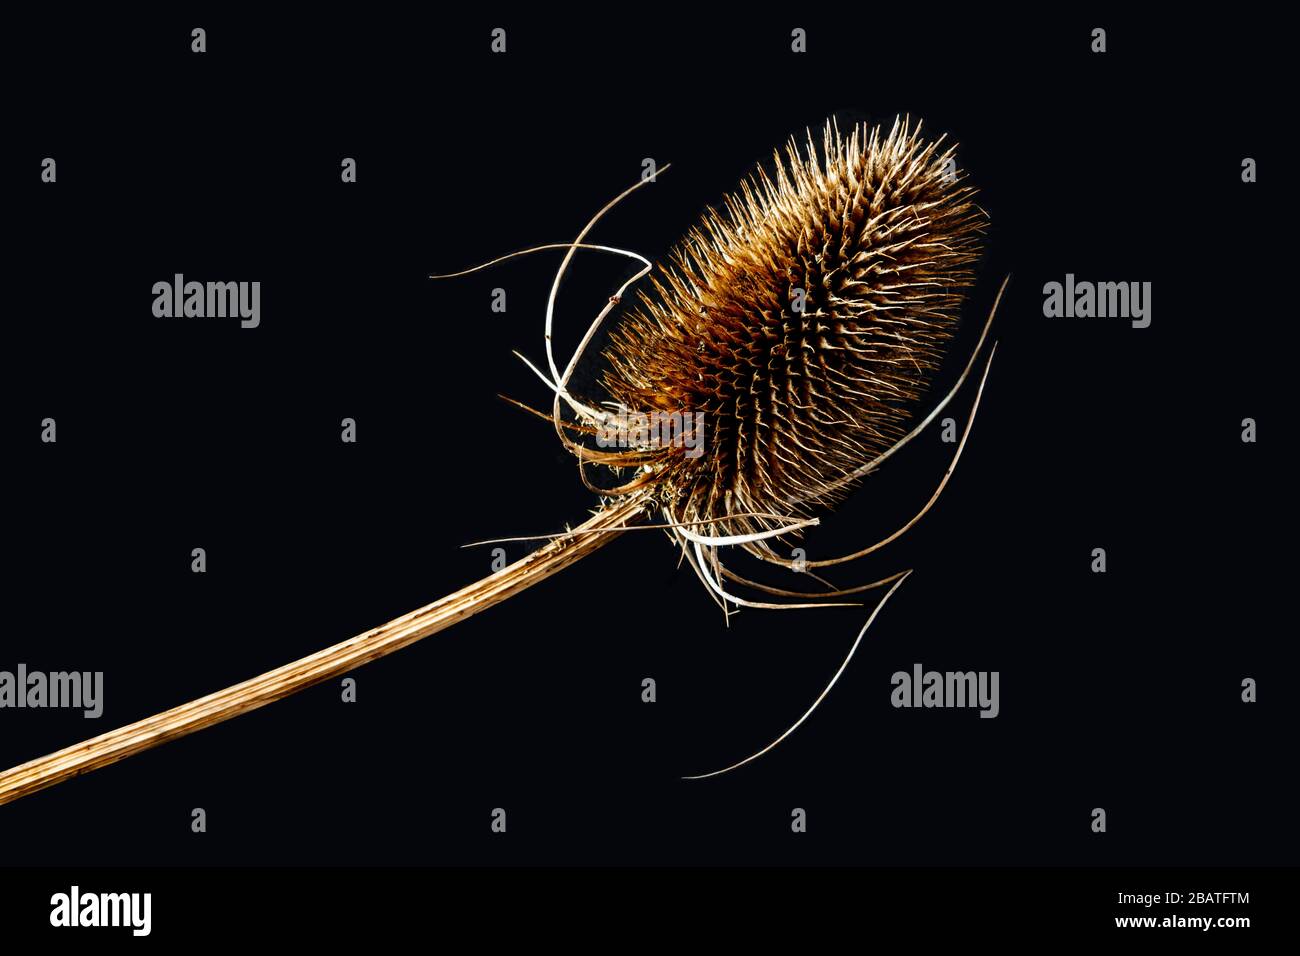 A dry teasel seed head on a black background Stock Photo